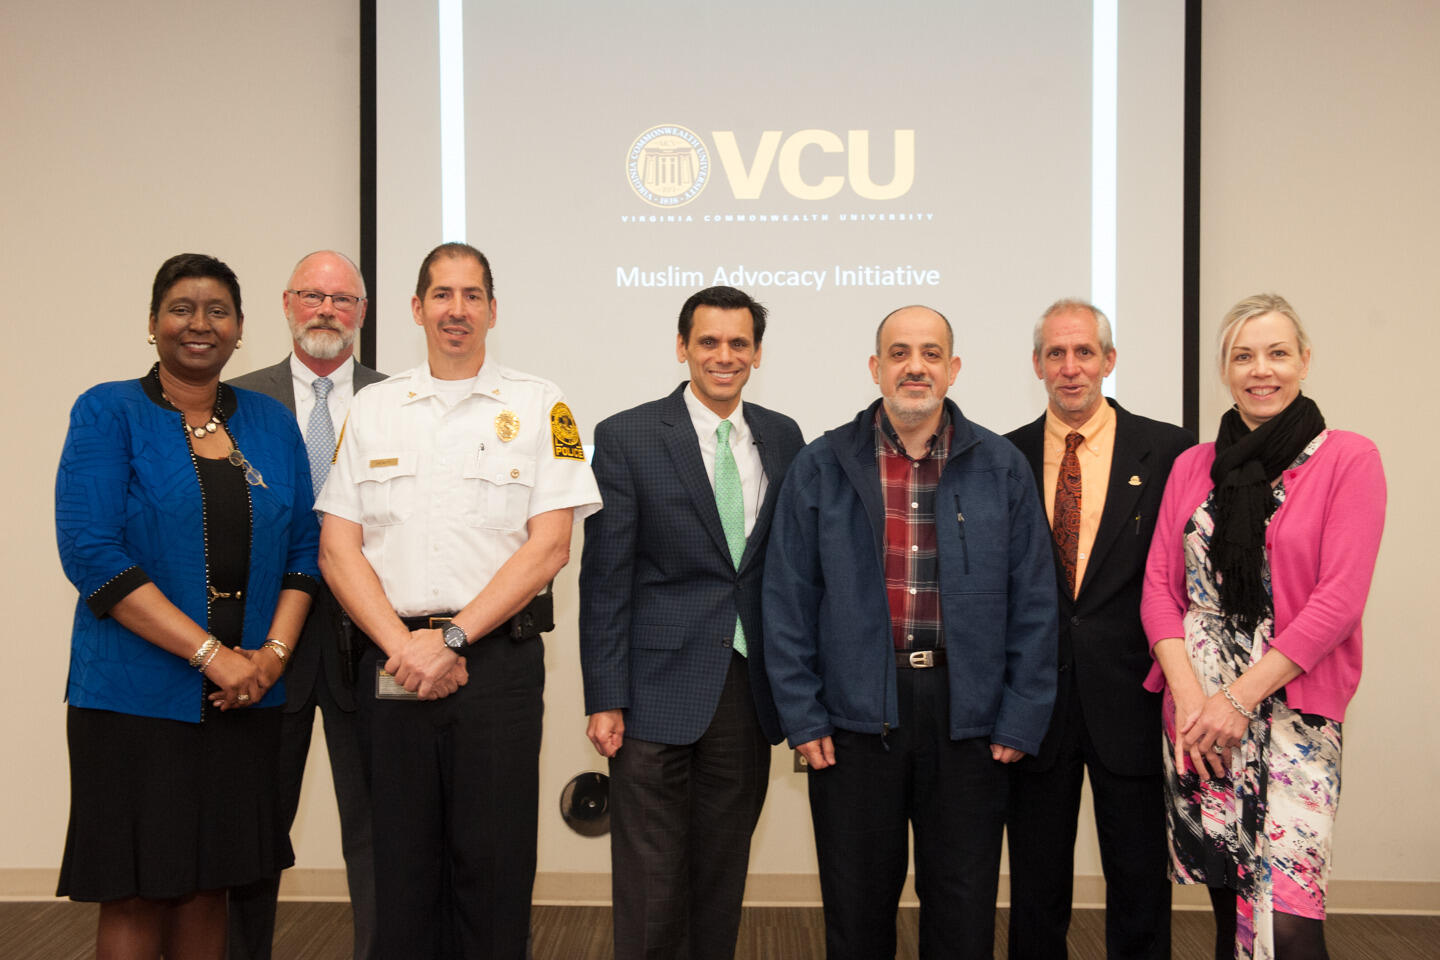 Members of the Muslim Advocacy Task Force include Wanda Mitchell, Ed.D., vice president for inclusive excellence; McKenna Brown, Ph.D., executive director, Global Education Office; John Venuti, assistant vice president for public safety and chief of police; Michael Rao, Ph.D., president of VCU; Imad Damaj, Ph.D., professor of pharmacology and toxicology; Charles Klink, Ph.D., interim vice provost for student affairs; and Amber Hill, Ph.D., director of international studies, Global Education Office, among others.